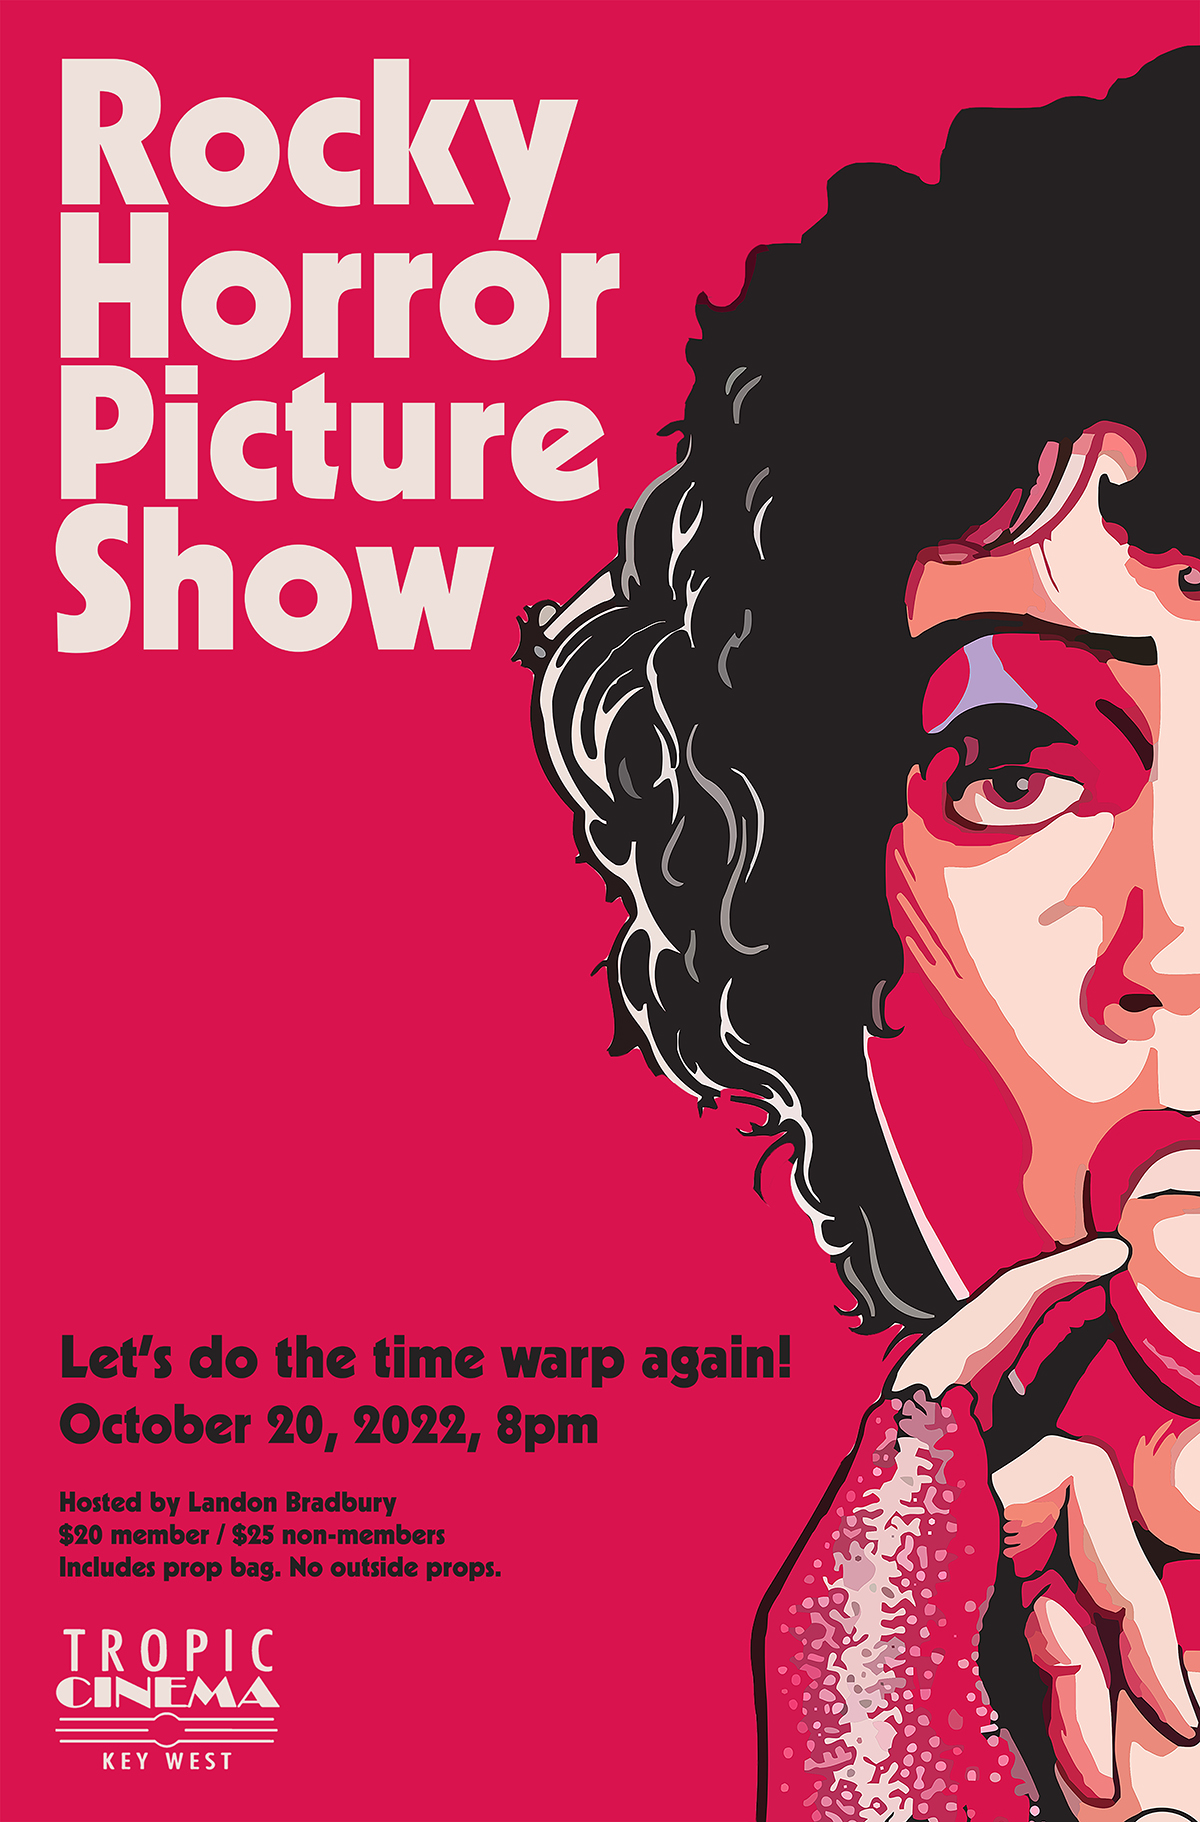 Event The Rocky Horror Picture Show